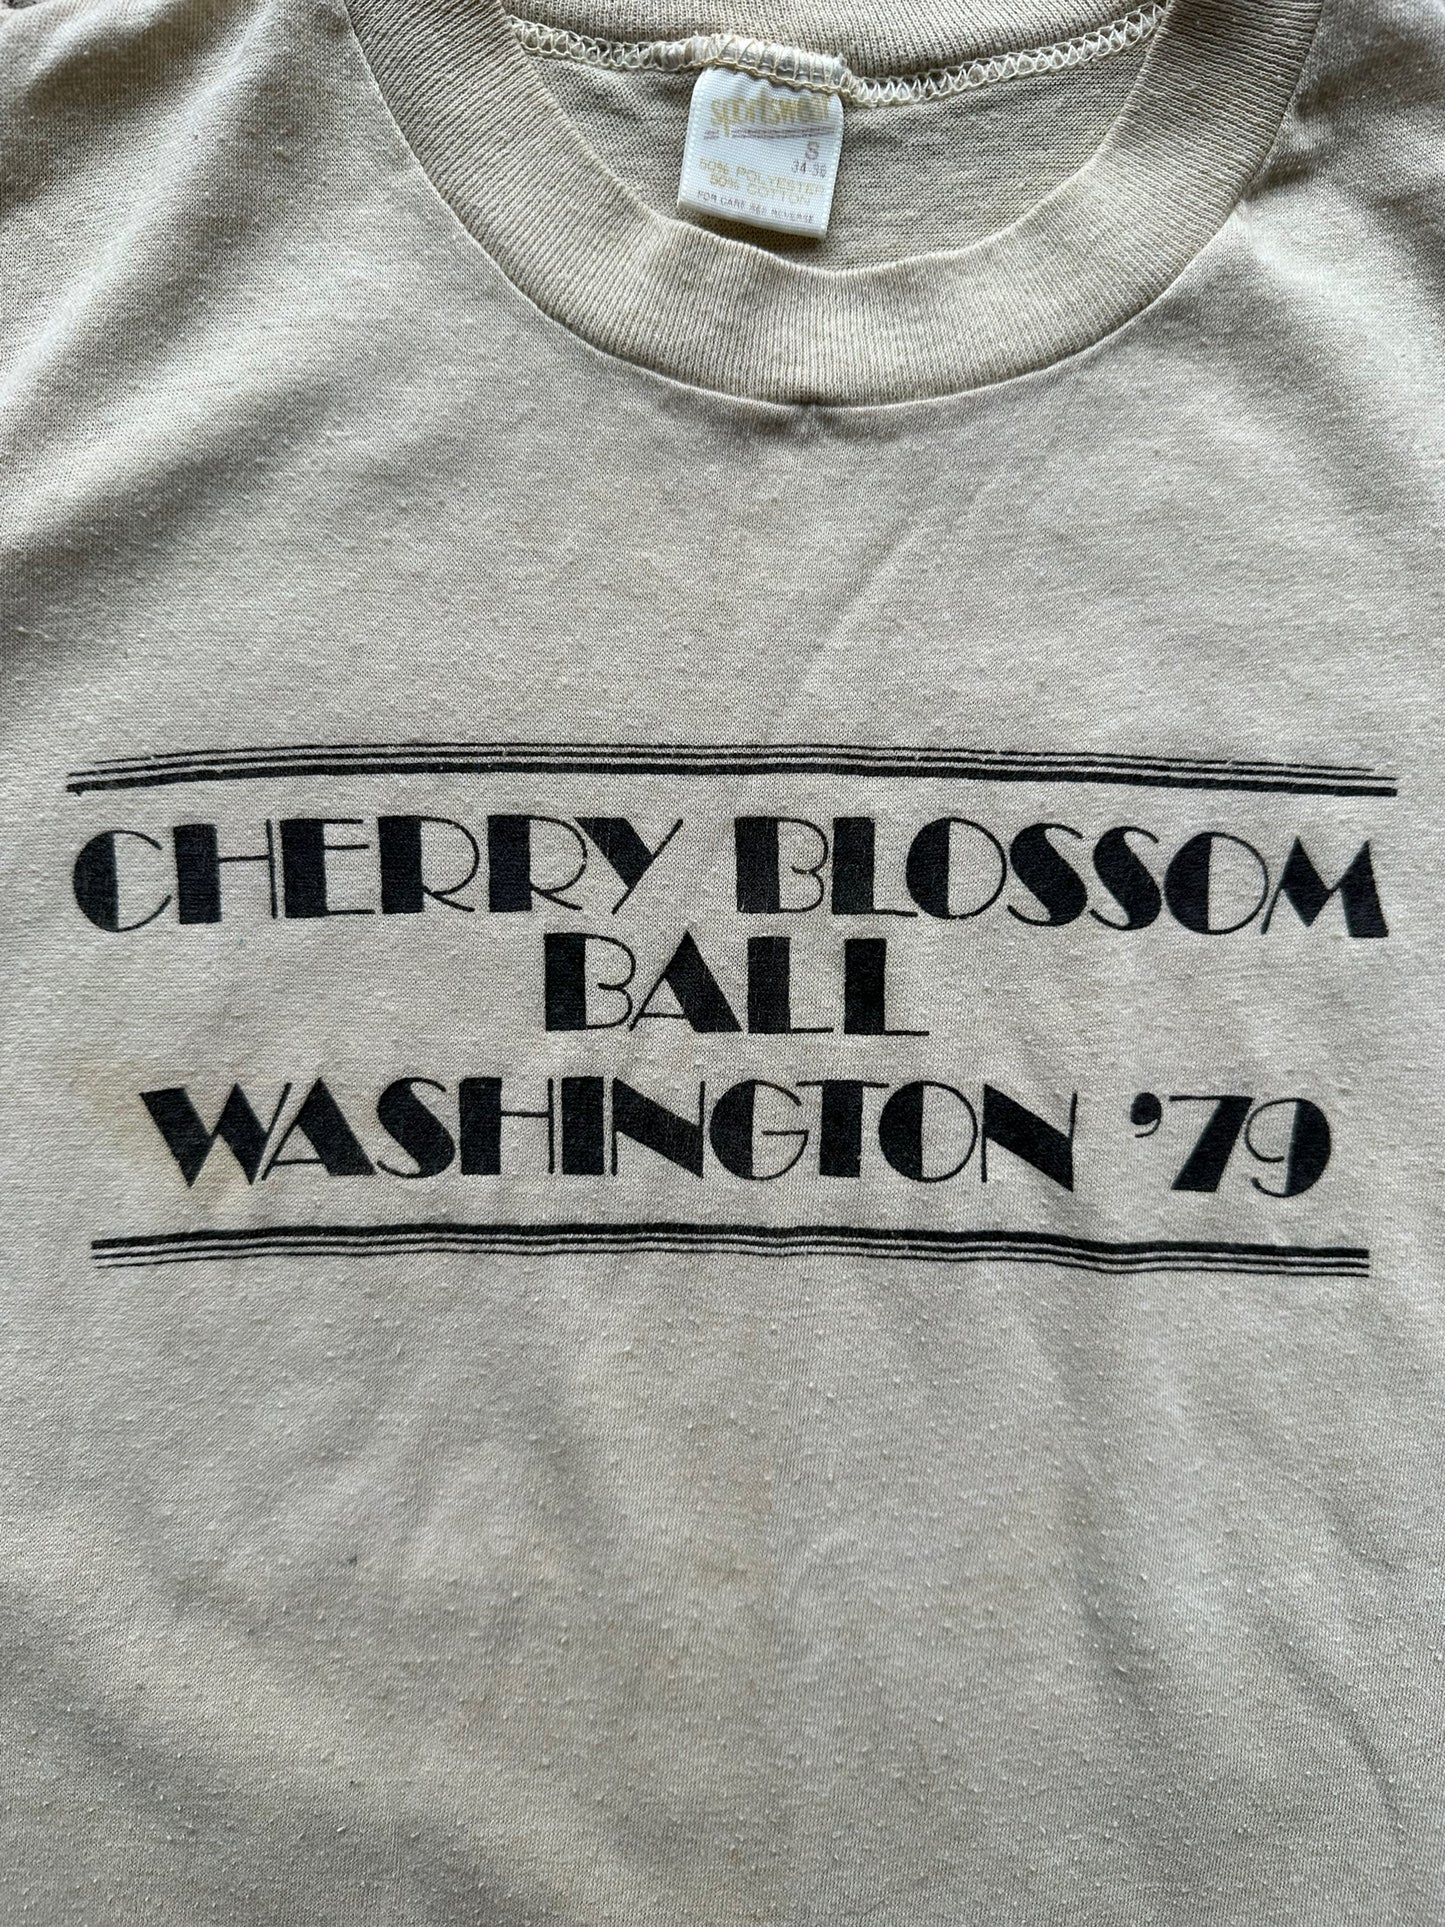 Front Graphic Close Up on Vintage Washington Cherry Blossom Ball 1979 Tee SZ S | Vintage Single Stitch T-Shirts Seattle | Barn Owl Vintage Tees Seattle